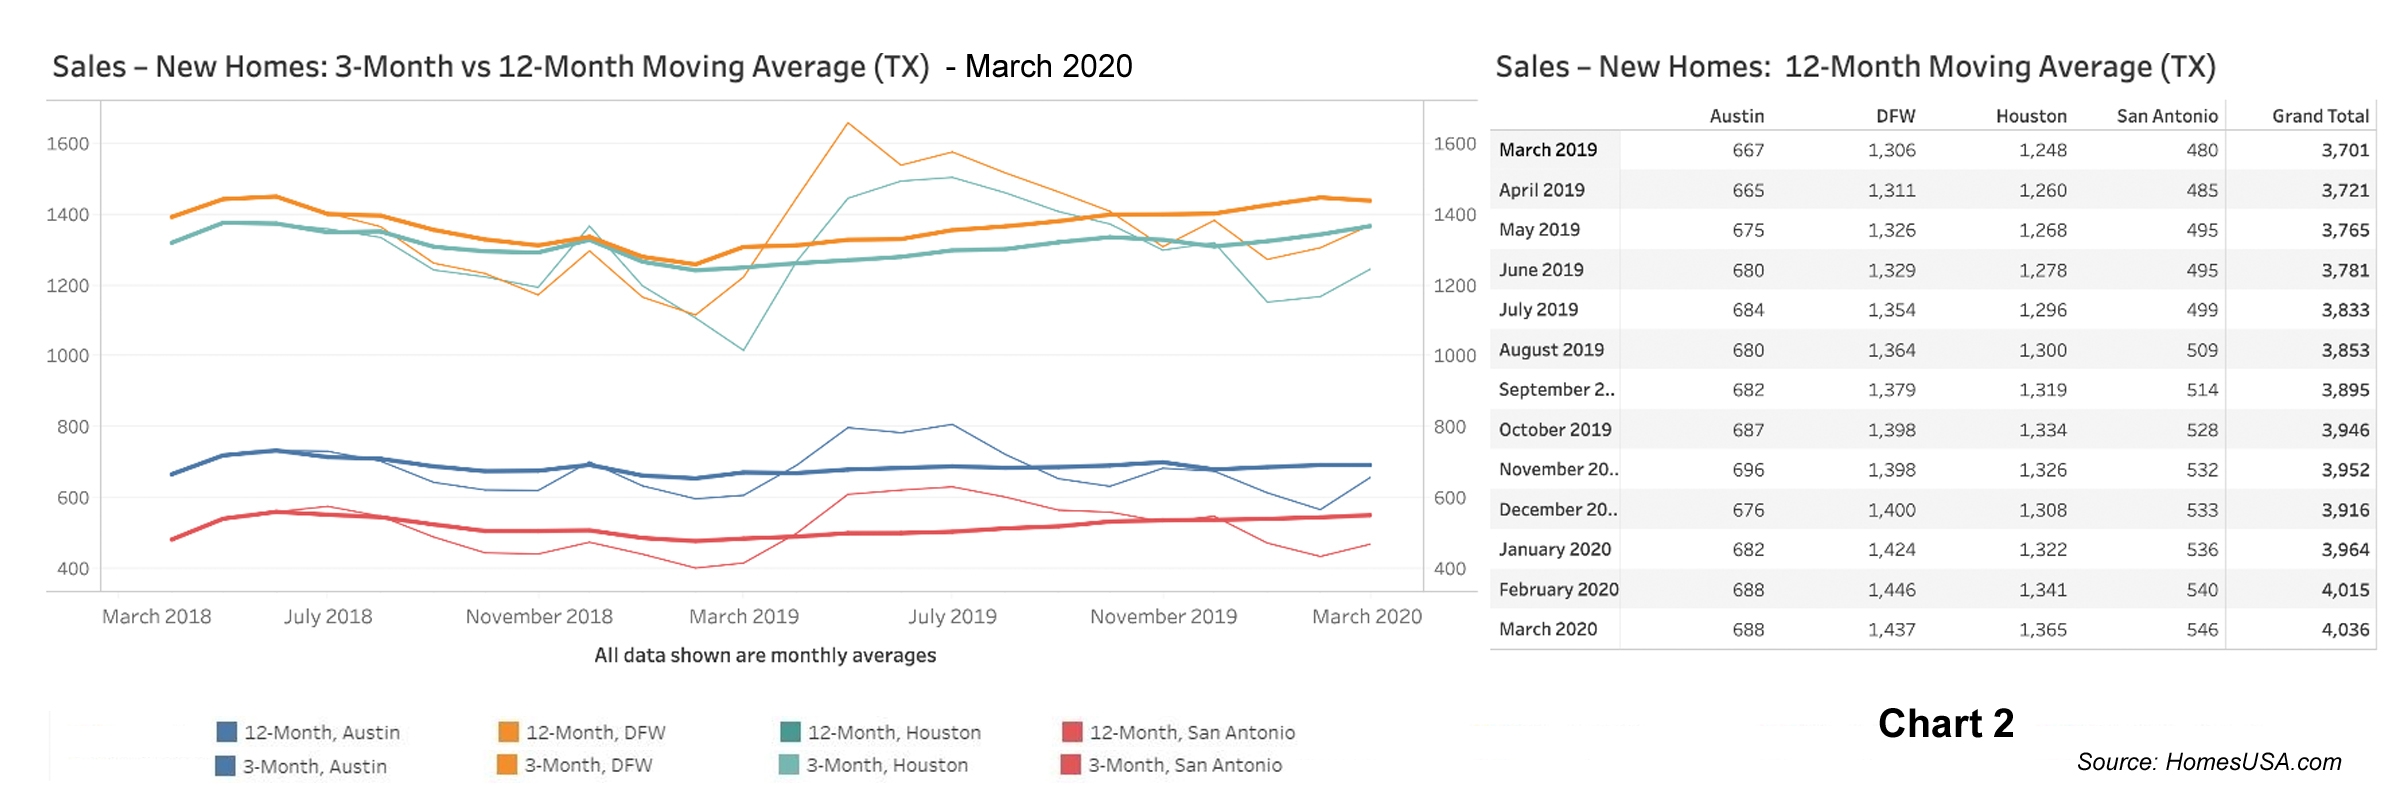 Chart 2: Texas New Home Sales - March 2020